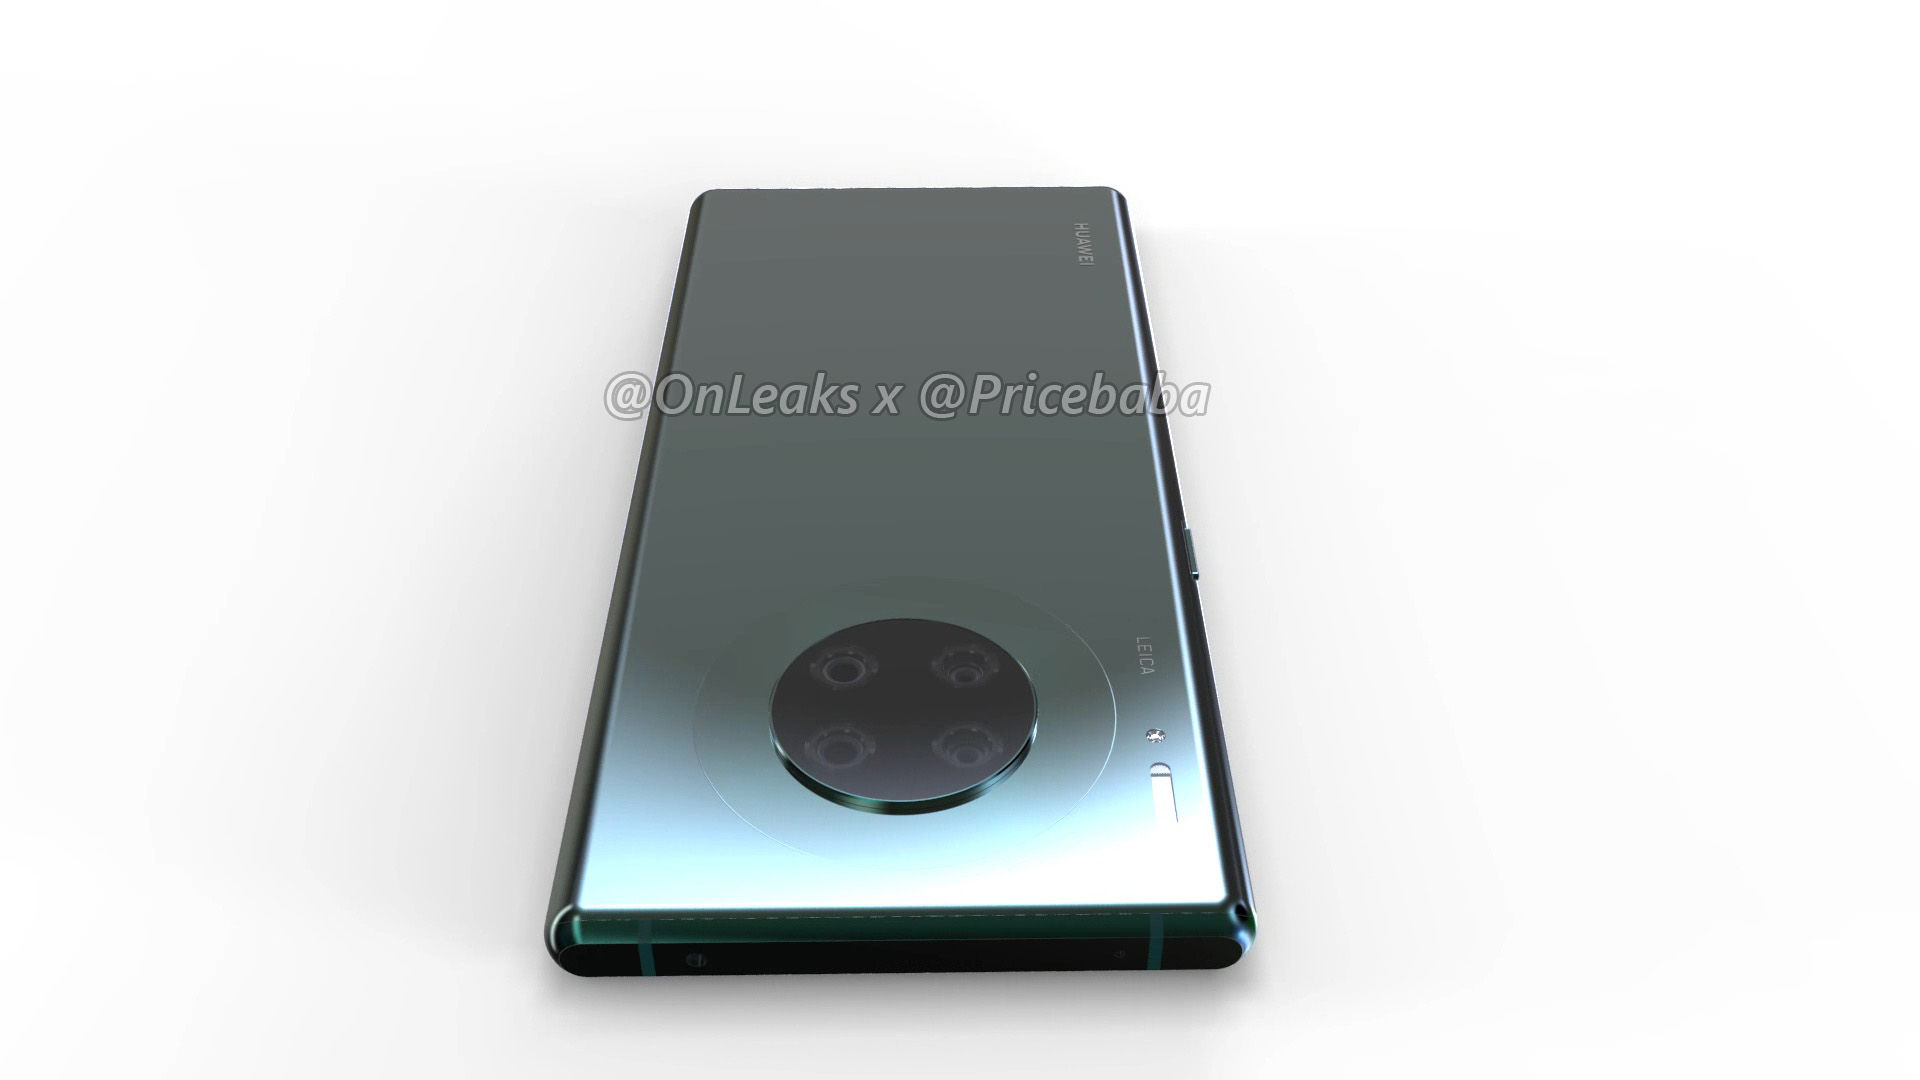 The back of the HUAWEI Mate 30 Pro according to Onleaks and Pricebaba